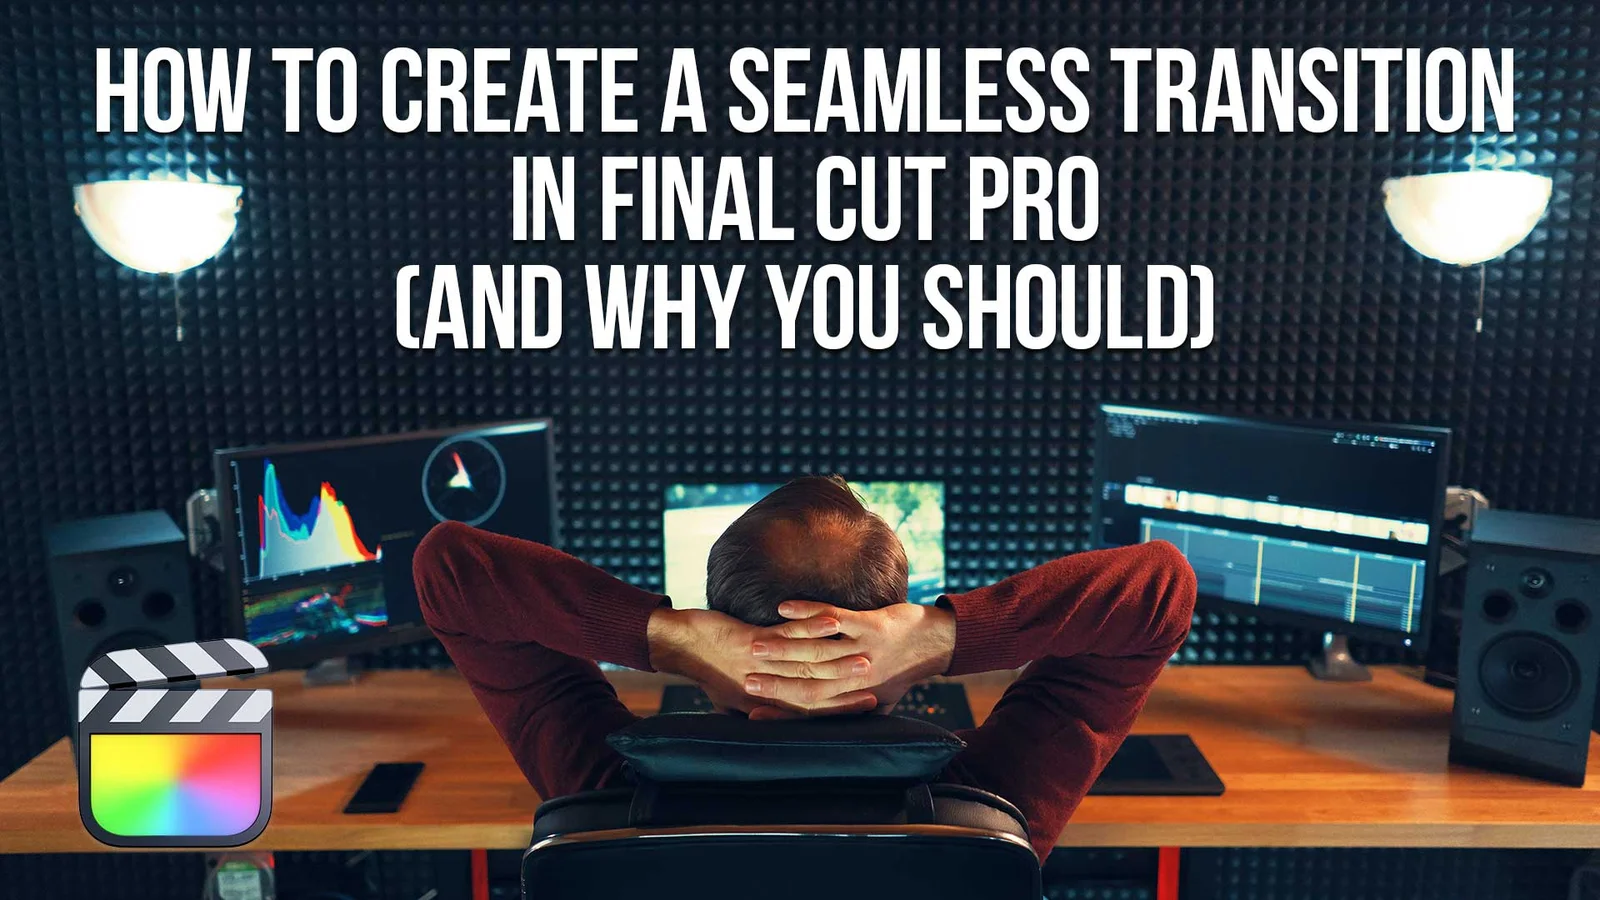 How to Create a Seamless Transition in Final Cut Pro (And Why You Should)